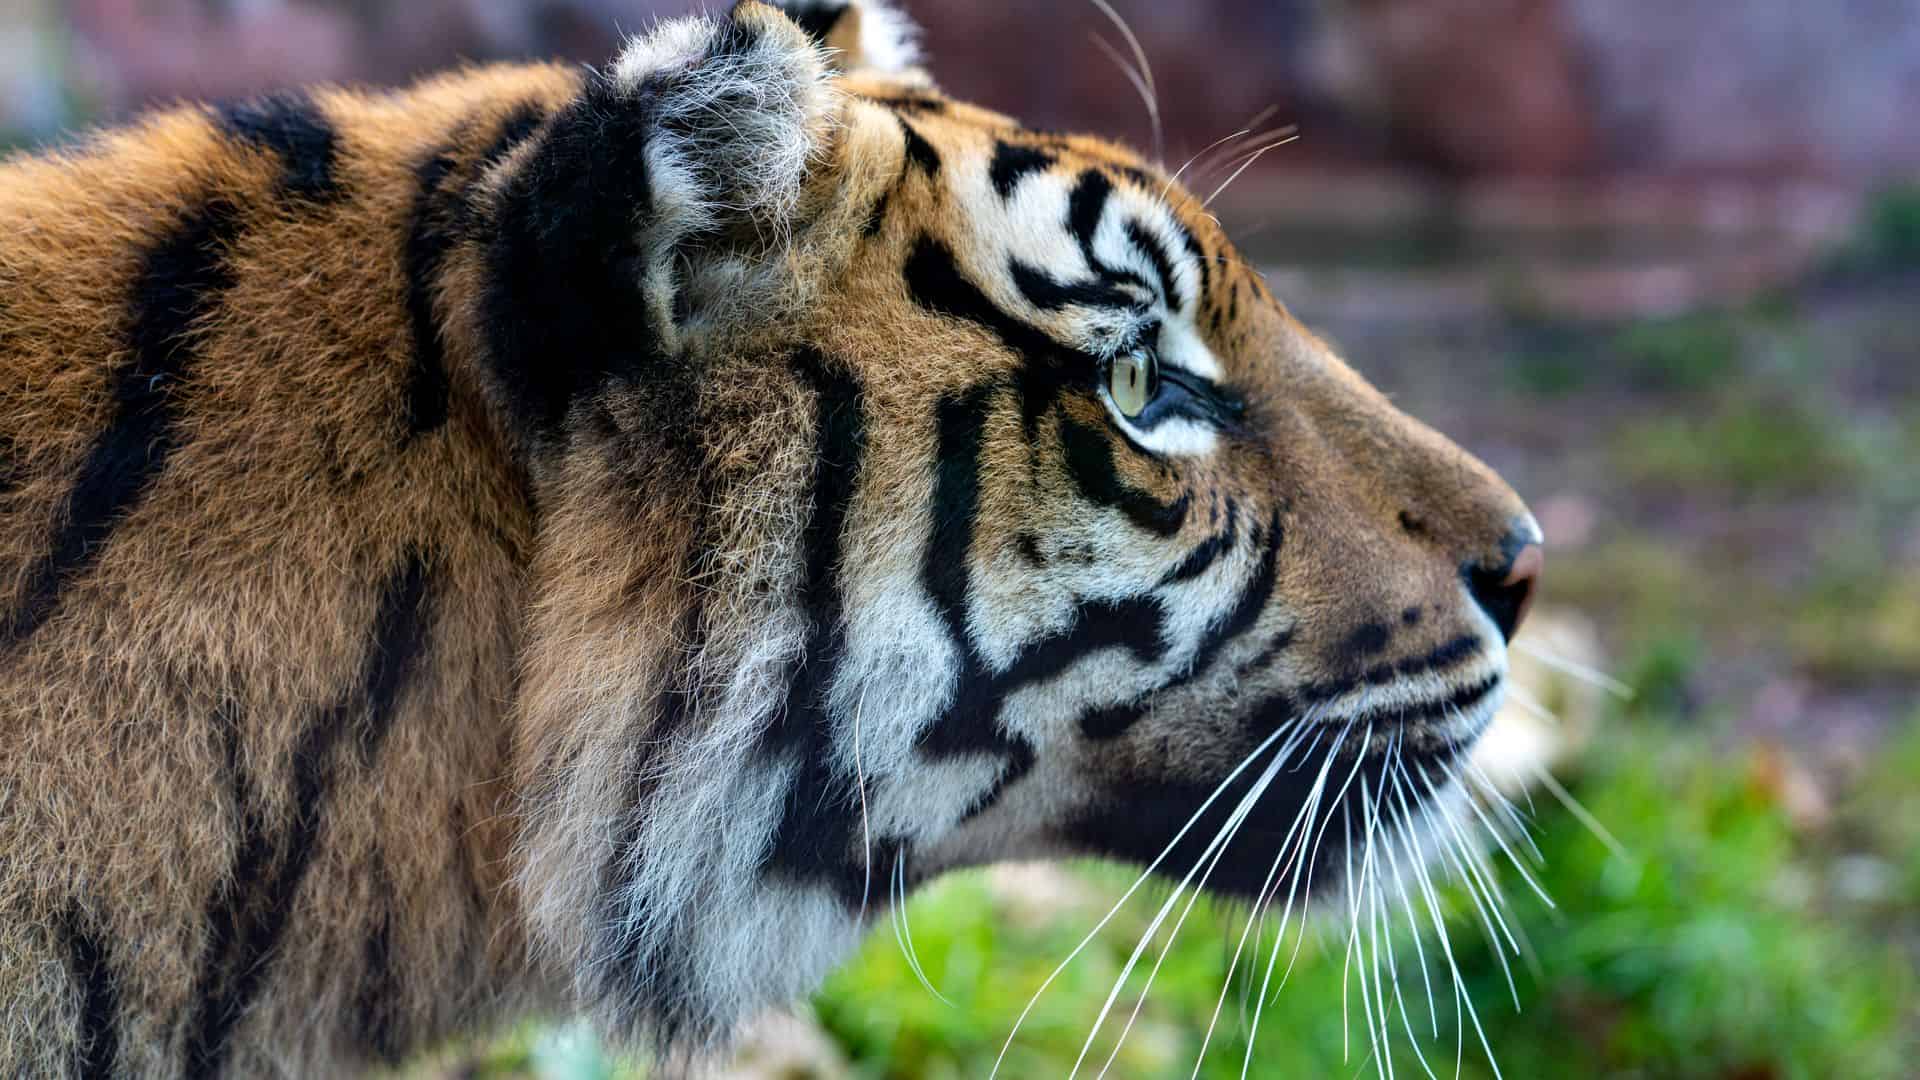 Close-up of a tiger's head at the Bioparco zoo in Rome